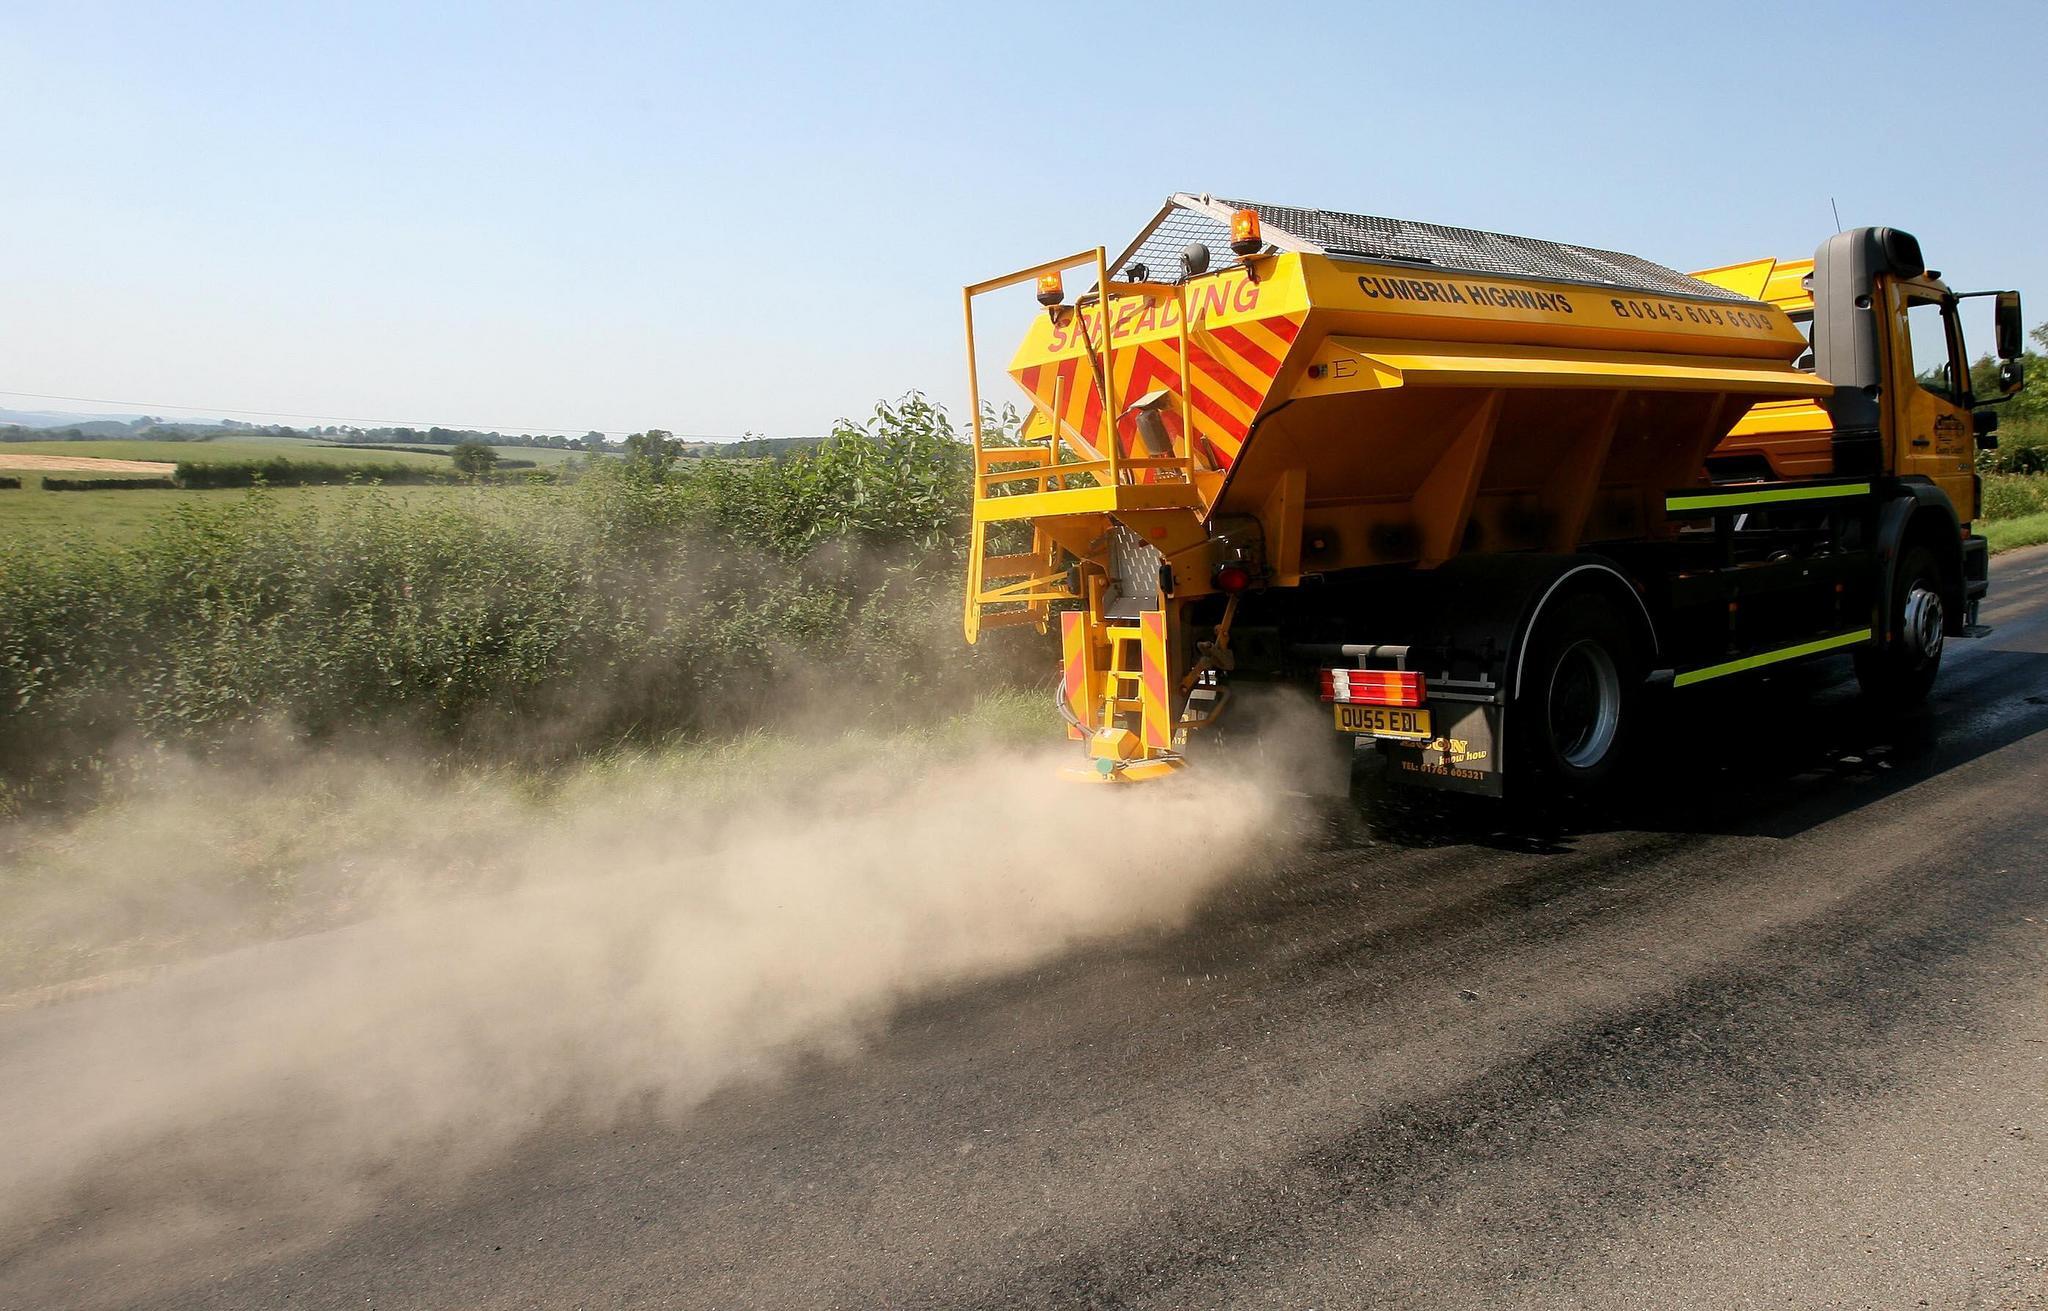 A council is preparing to deploy gritters in response to melting roads as temperatures soar (Martin Rickett/PA)